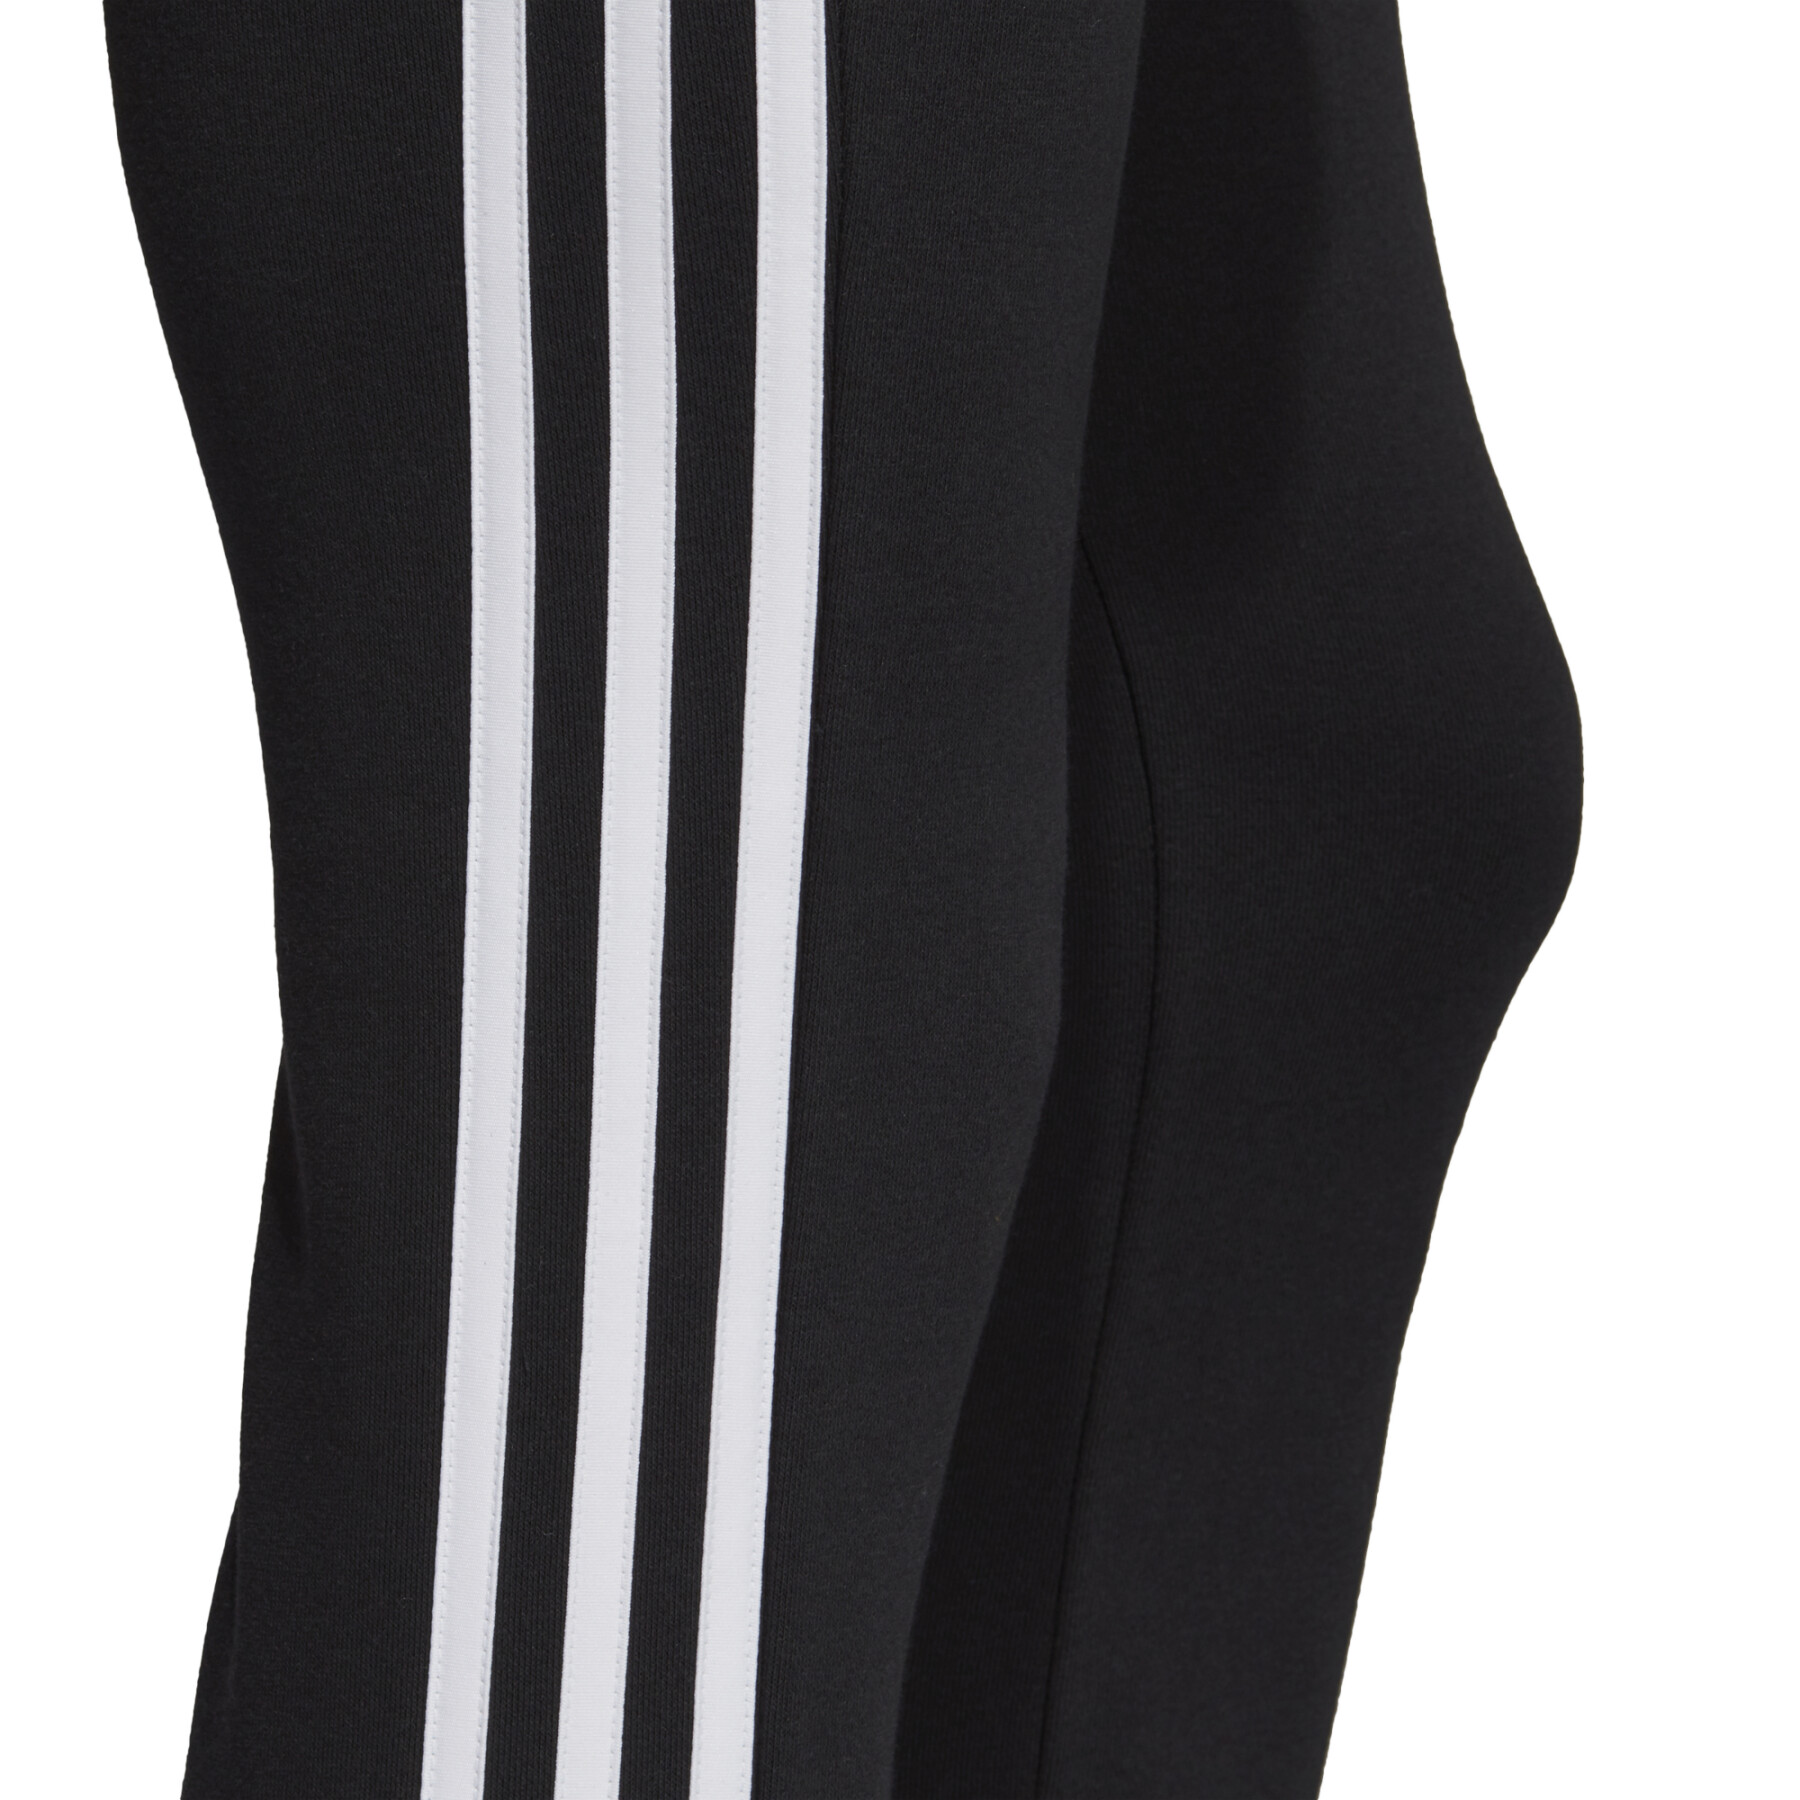 Pantalon femme adidas Must Haves 3-Stripes French Terry